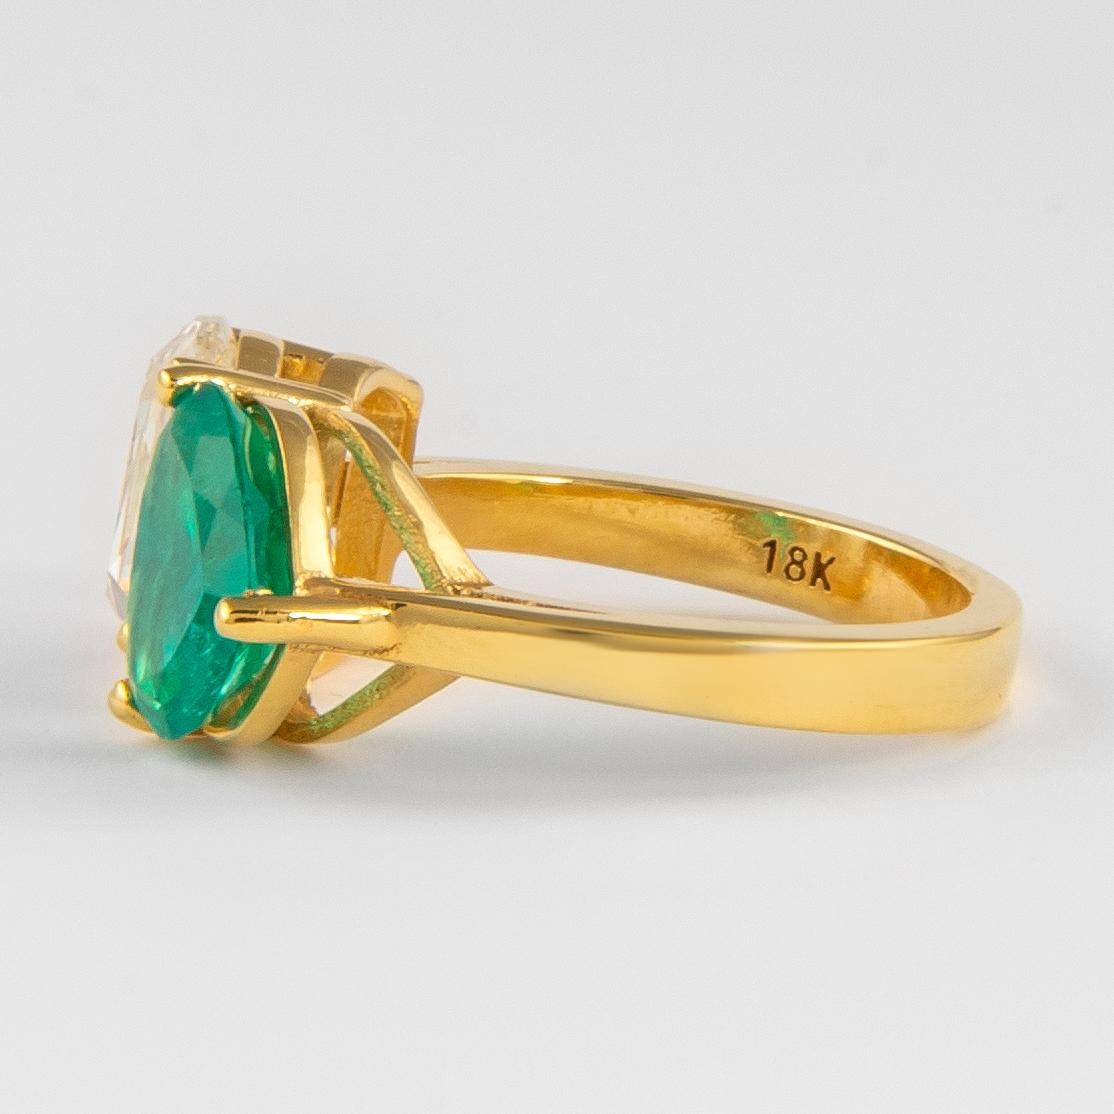 Alexander 3.11 Carat Toi Et Moi Emerald & Rose Cut Diamond Ring 18k Yellow Gold In New Condition For Sale In BEVERLY HILLS, CA